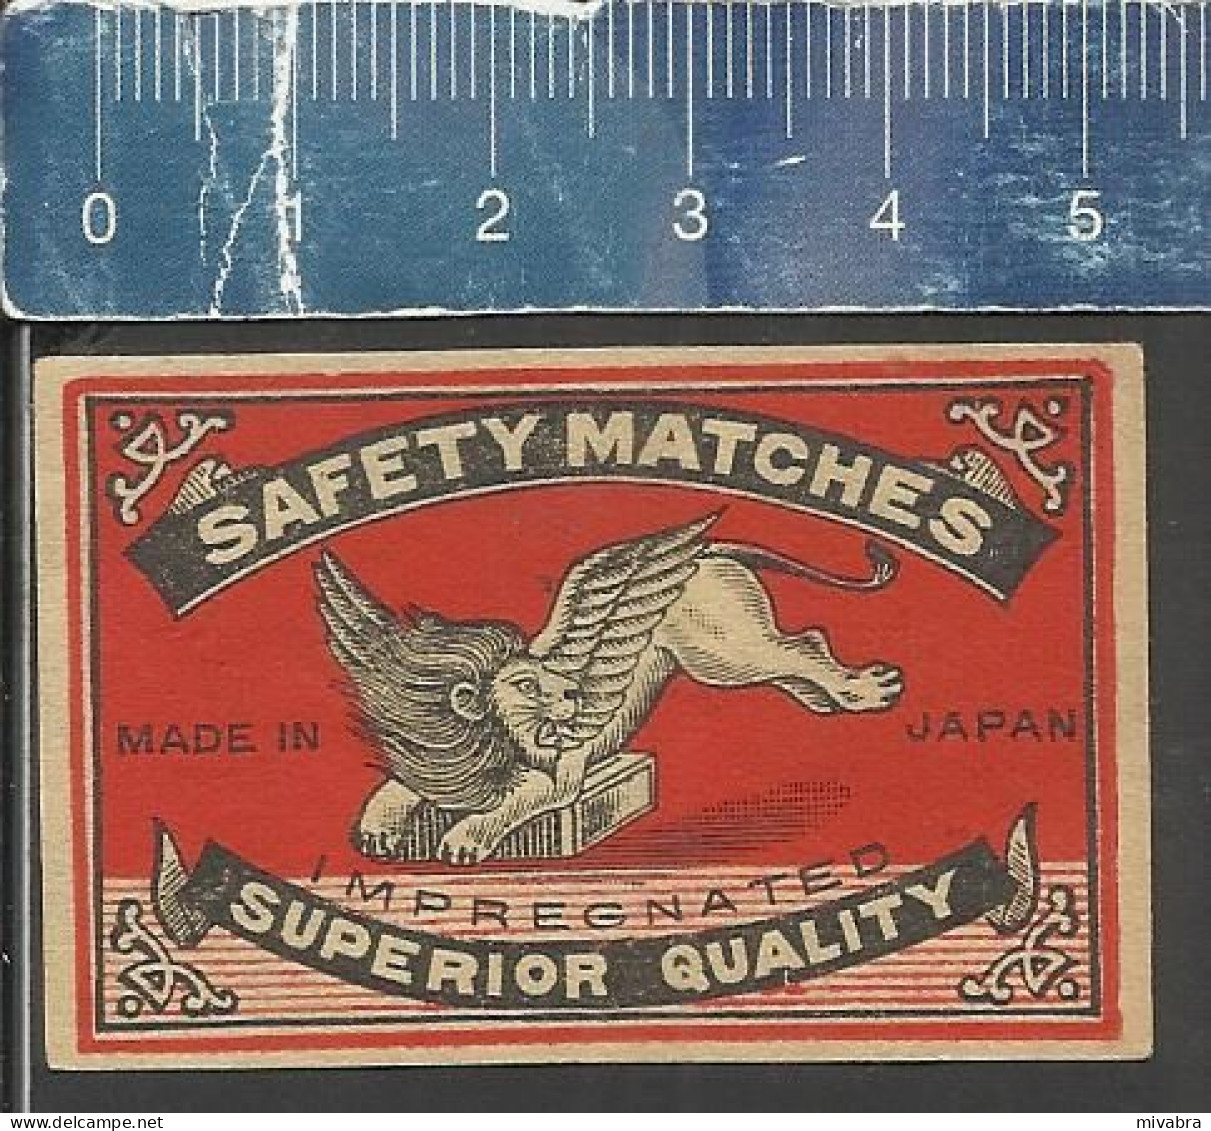 WINGED LION WITH WINGS SAFETY MATCHES IMPREGNATED SUPERIOR QUALITY - OLD VINTAGE MATCHBOX LABEL MADE JAPAN - Matchbox Labels